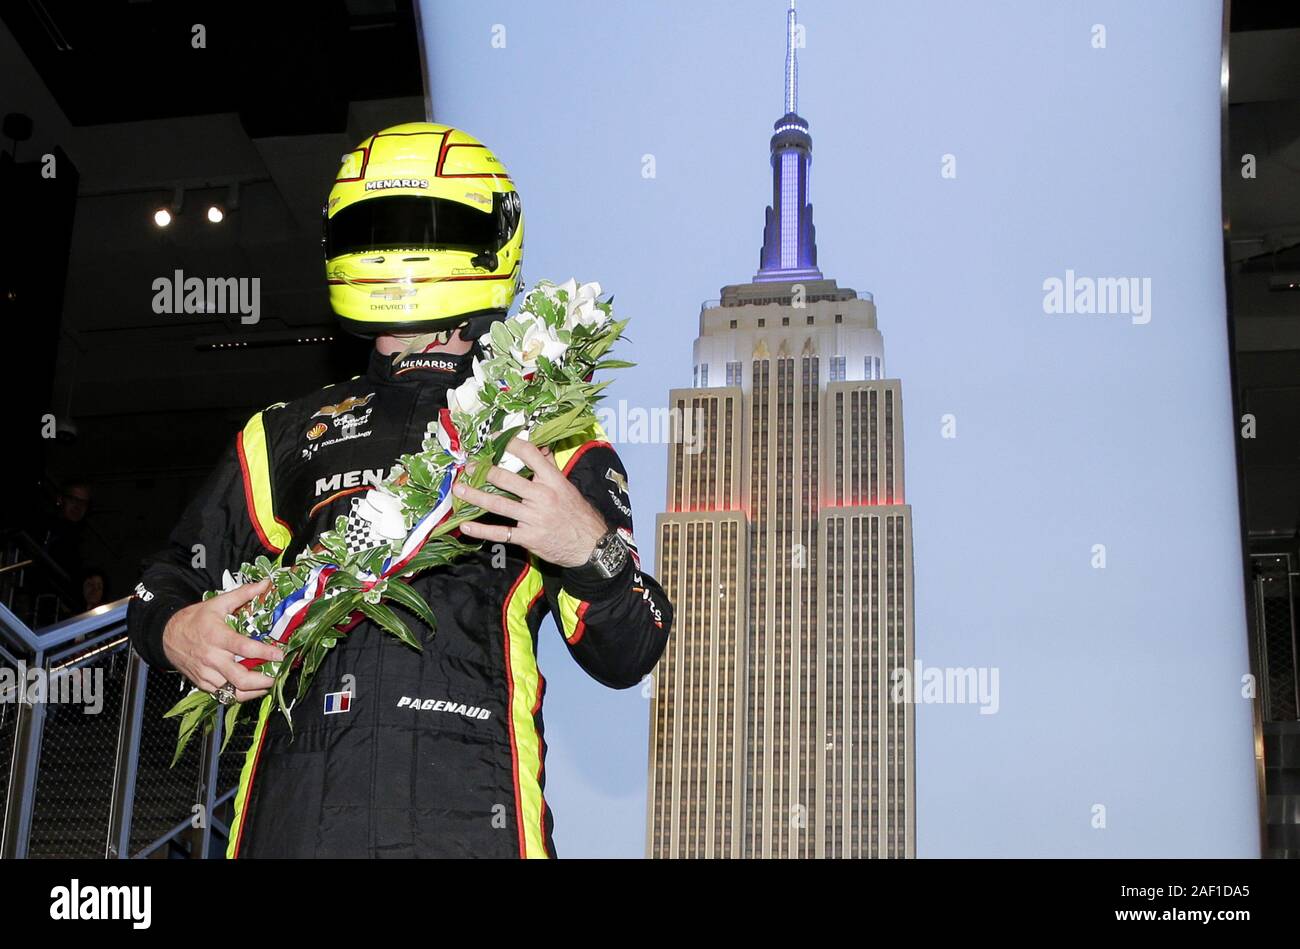 New York, United States. 12th Dec, 2019. Simon Pagenaud, winner of the 103rd running of the Indianapolis 500 and driver of the #22 Menards Team Penske Chevrolet, visits the Empire State Building in New York City on May 28, 2019, following his victory in Sunday's historic race. Photo by John Angelillo/UPI Credit: UPI/Alamy Live News Stock Photo